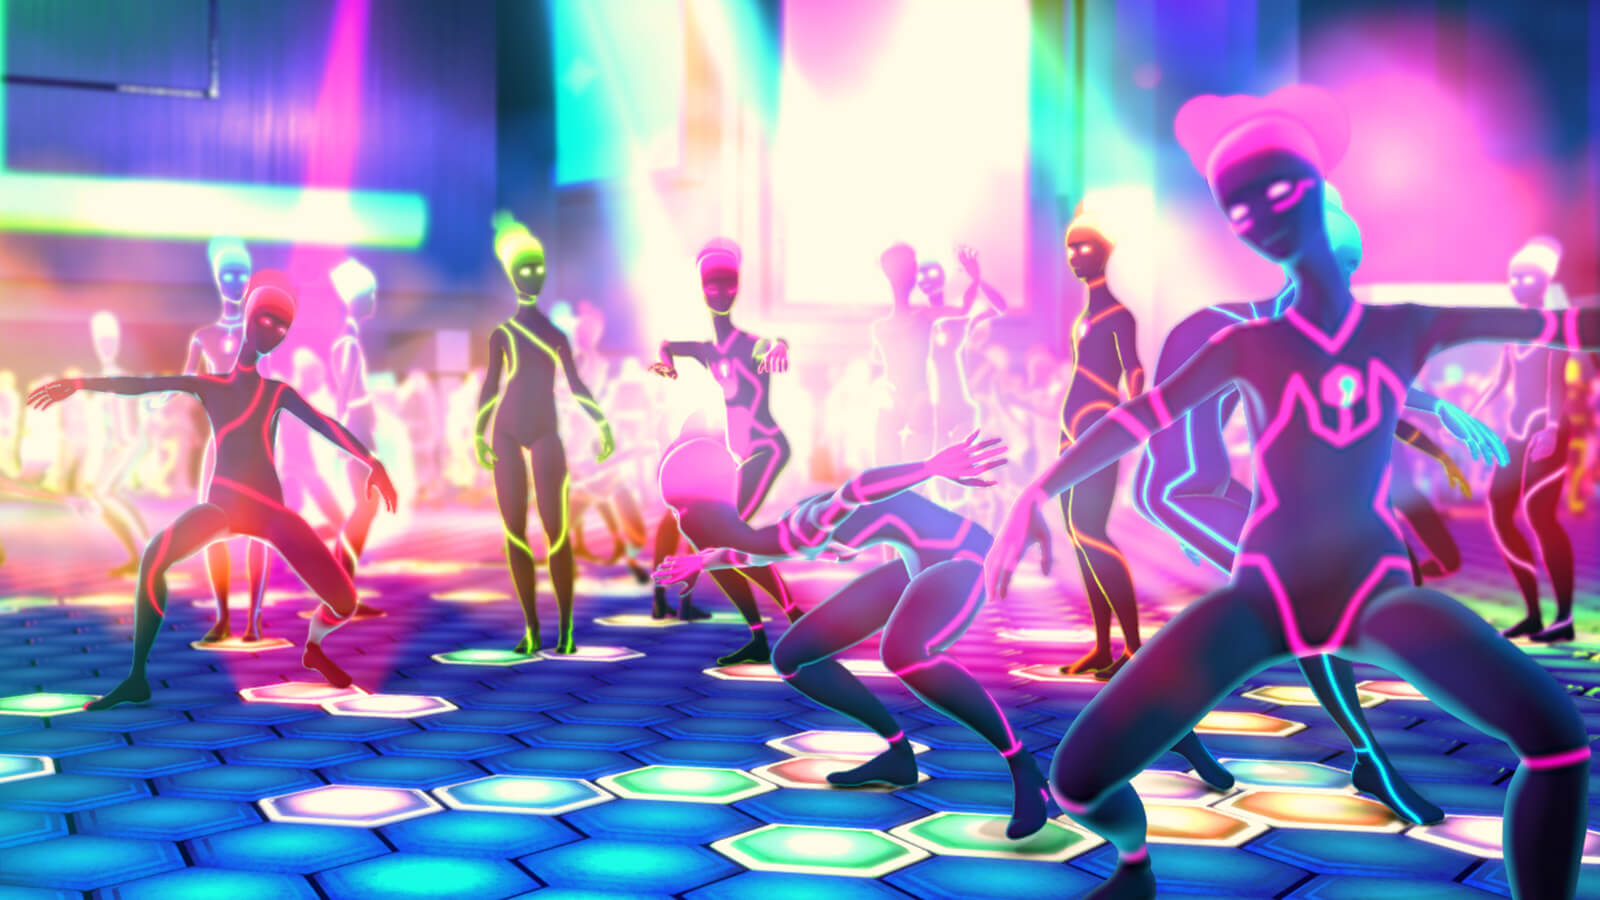 Humanoid figures move and dance in a nightclub suffused with neon colors